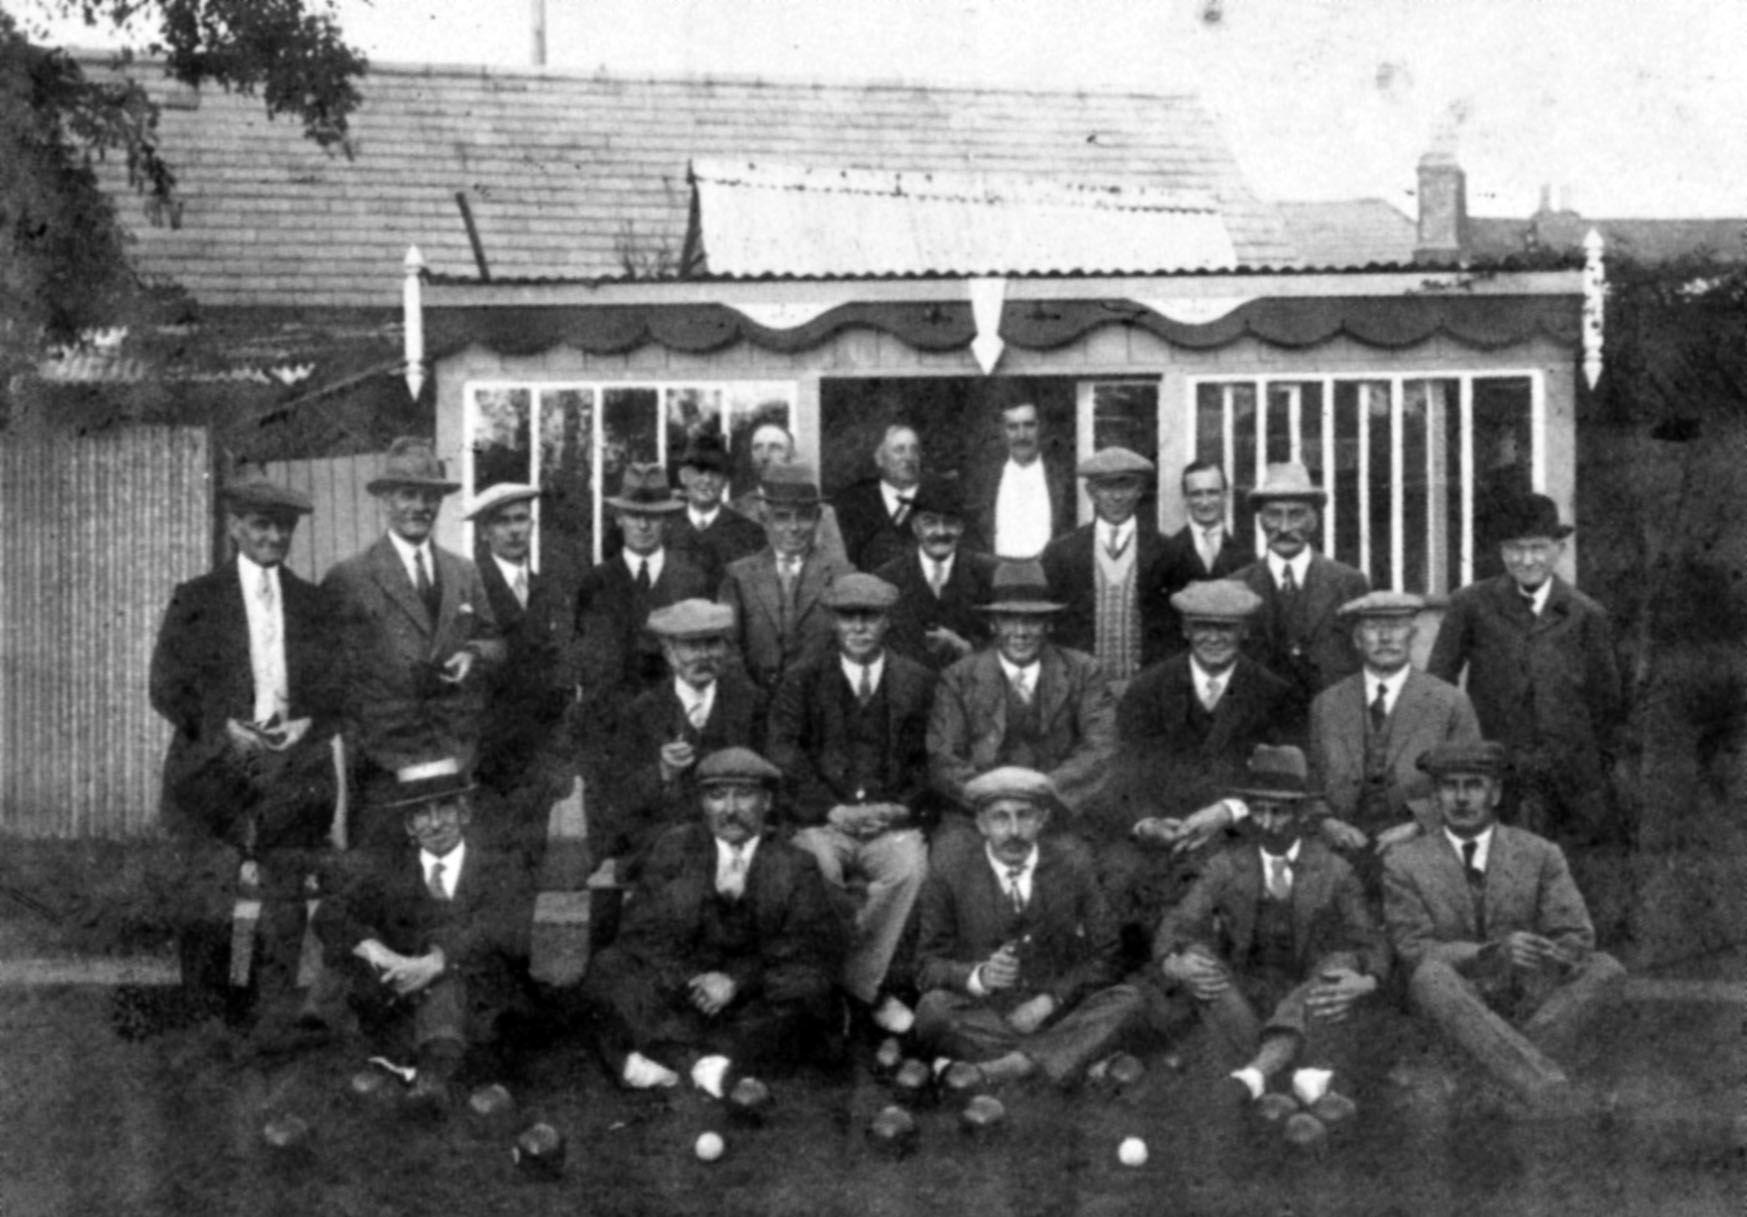 Group photo on the green behind the King's Arms, 1900.